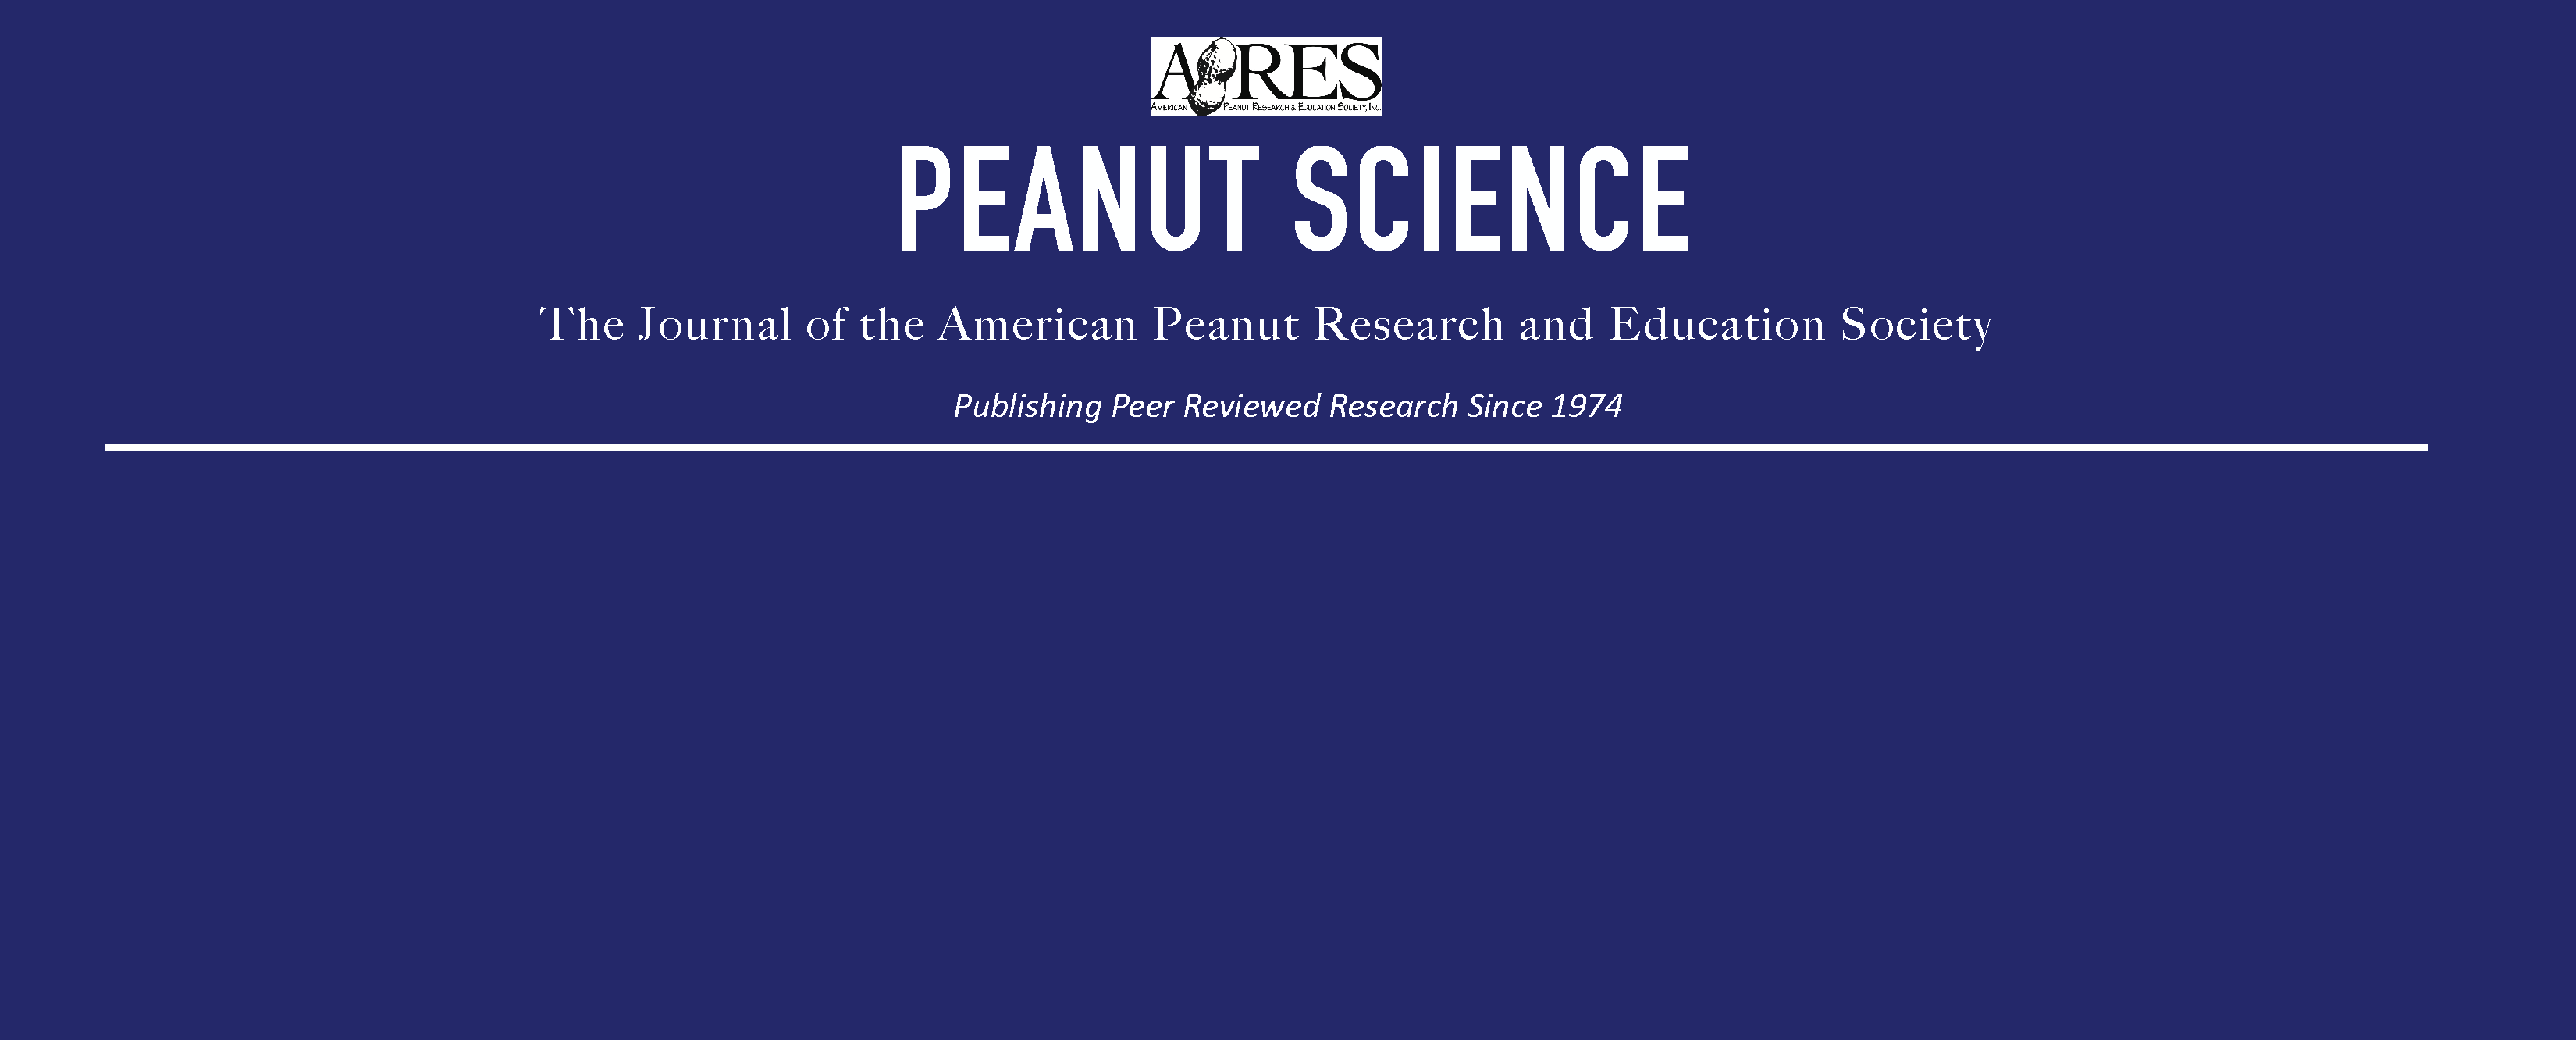 Heterosis and Combining Ability Studies and Relationship Among Fruit and Seed Characters in Peanut¹